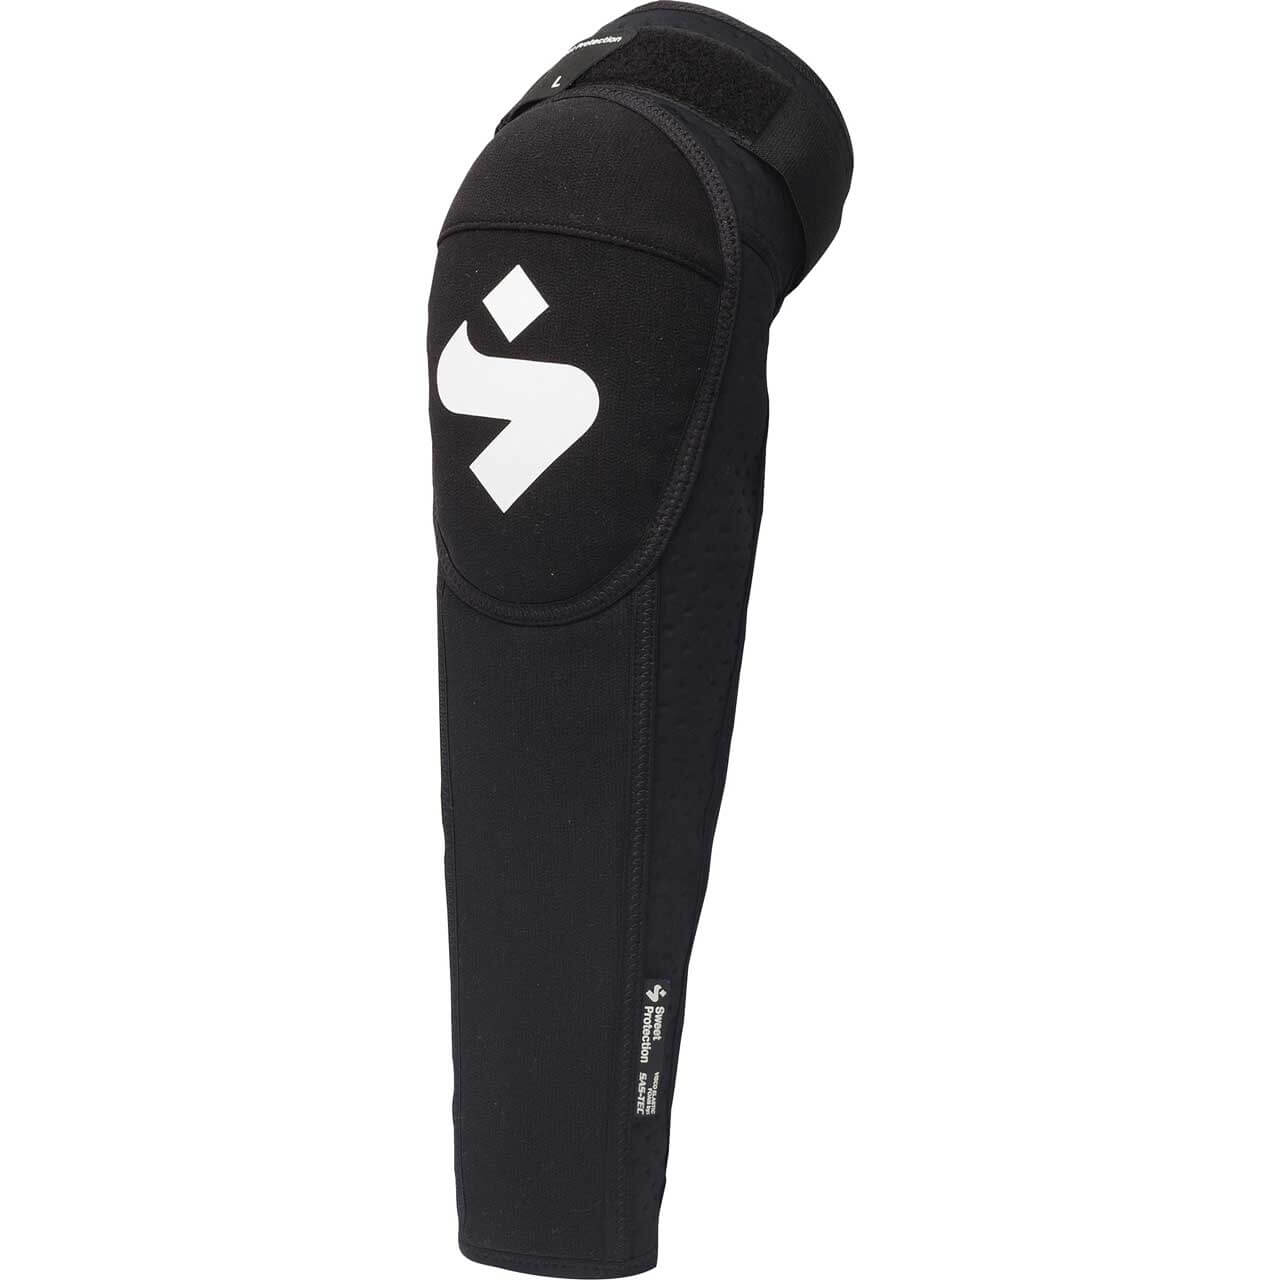 Sweet Protection Knee Shin Pads - Black, M von Sweet Protection